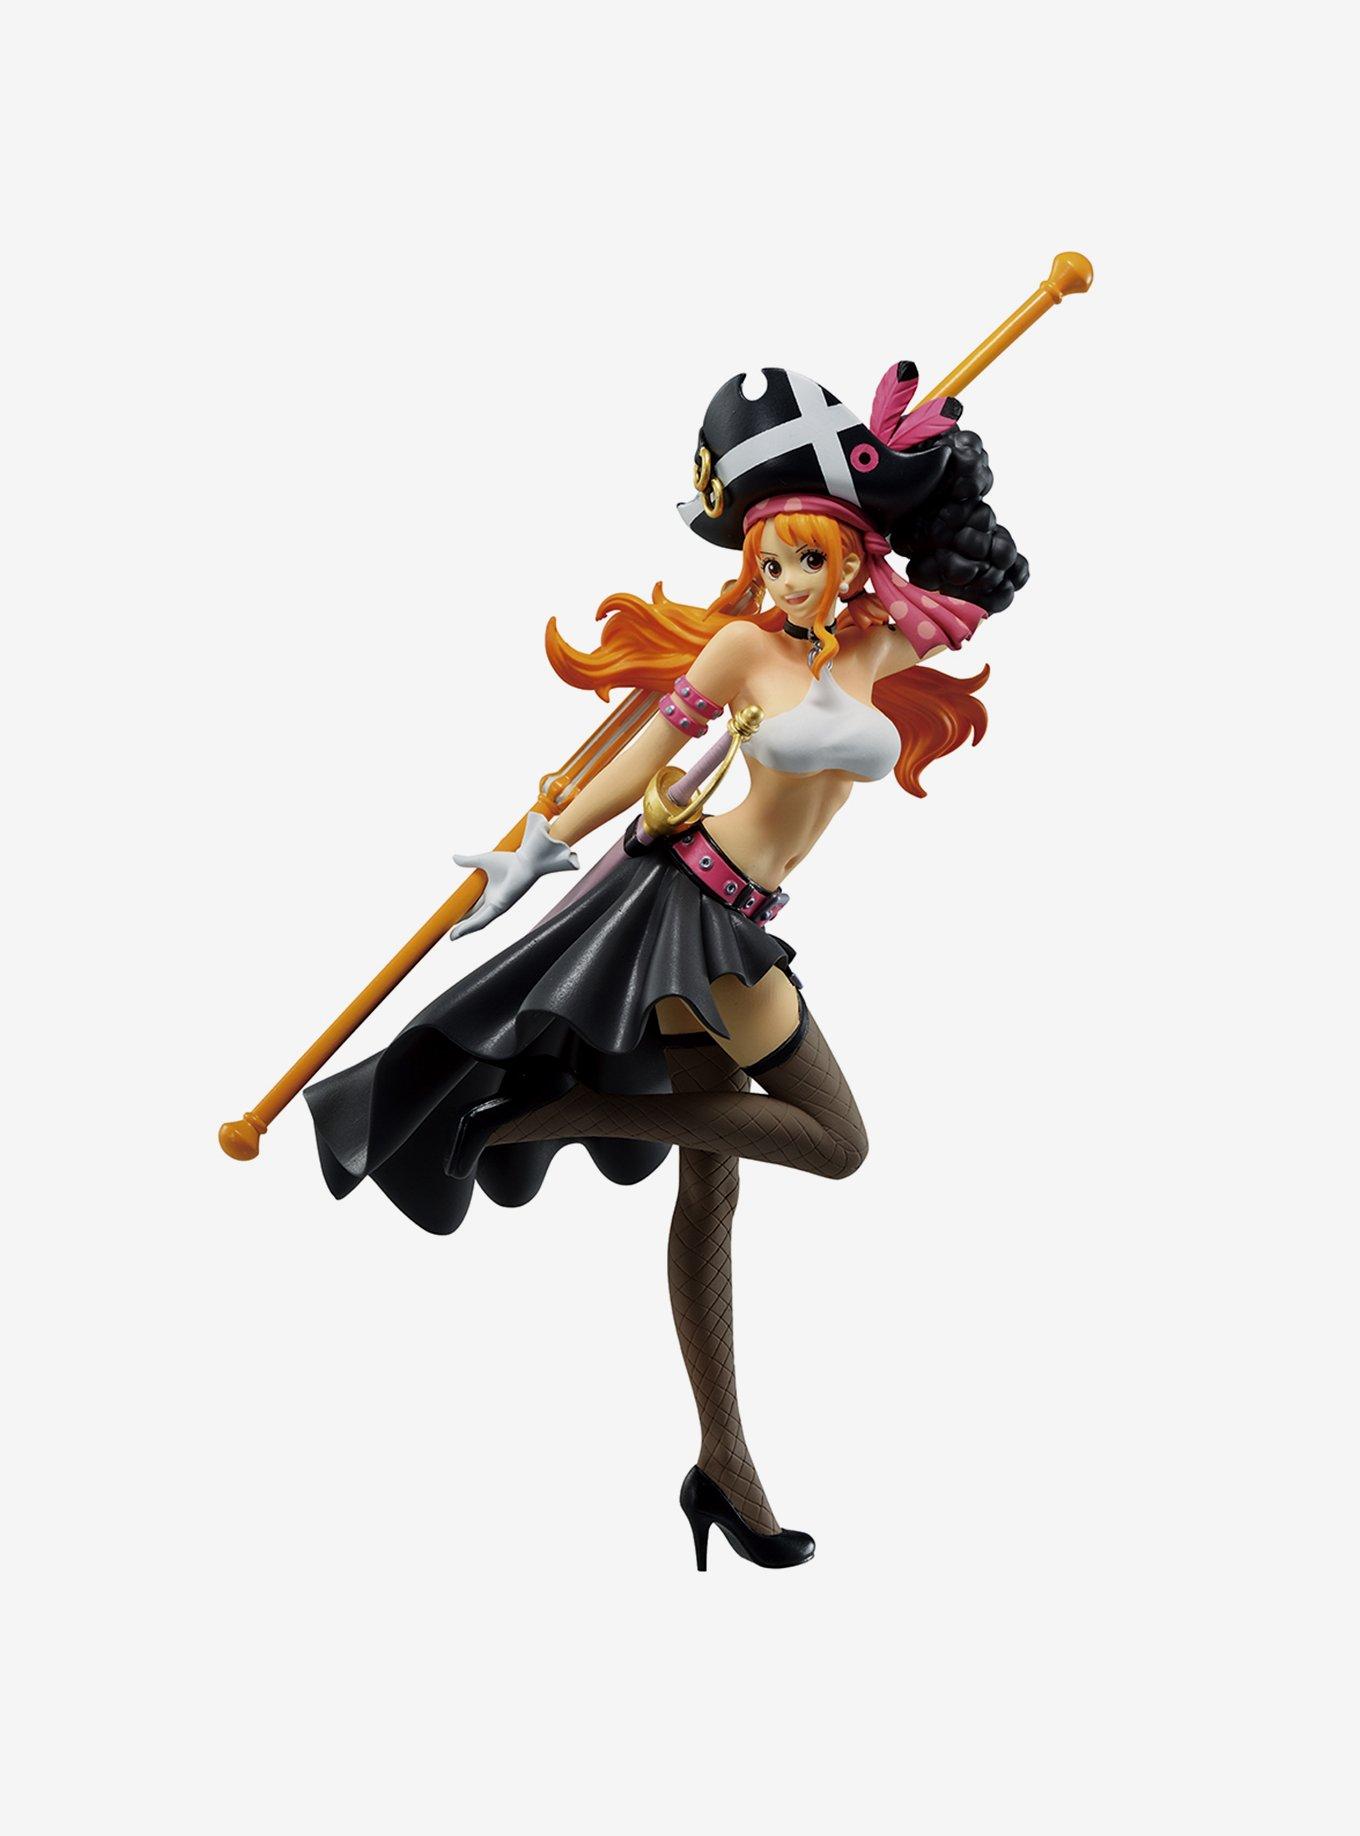 Cute One Piece Nami Pin - Official One Piece Merch Collection 2023 - One  Piece Universe Store